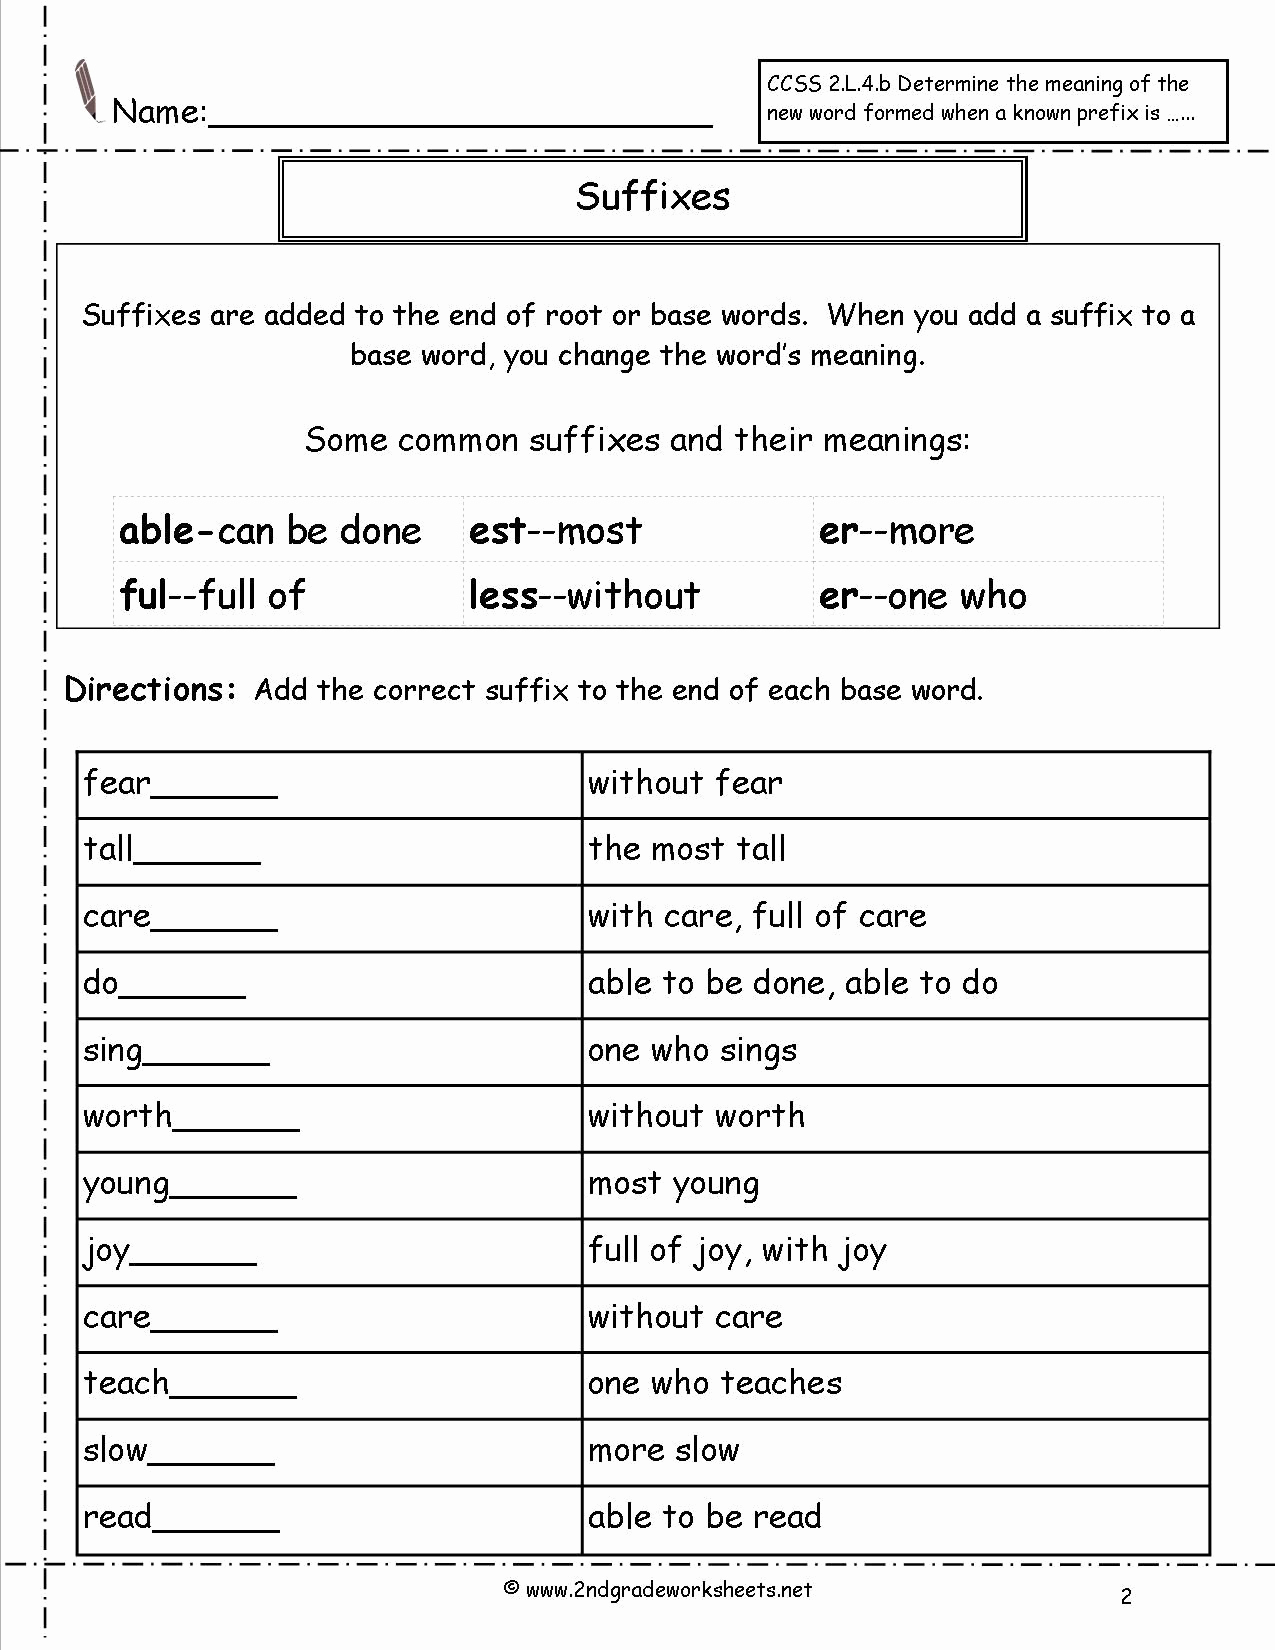 Root Word Worksheets 4th Grade Awesome 20 Suffix Worksheets for 4th Grade